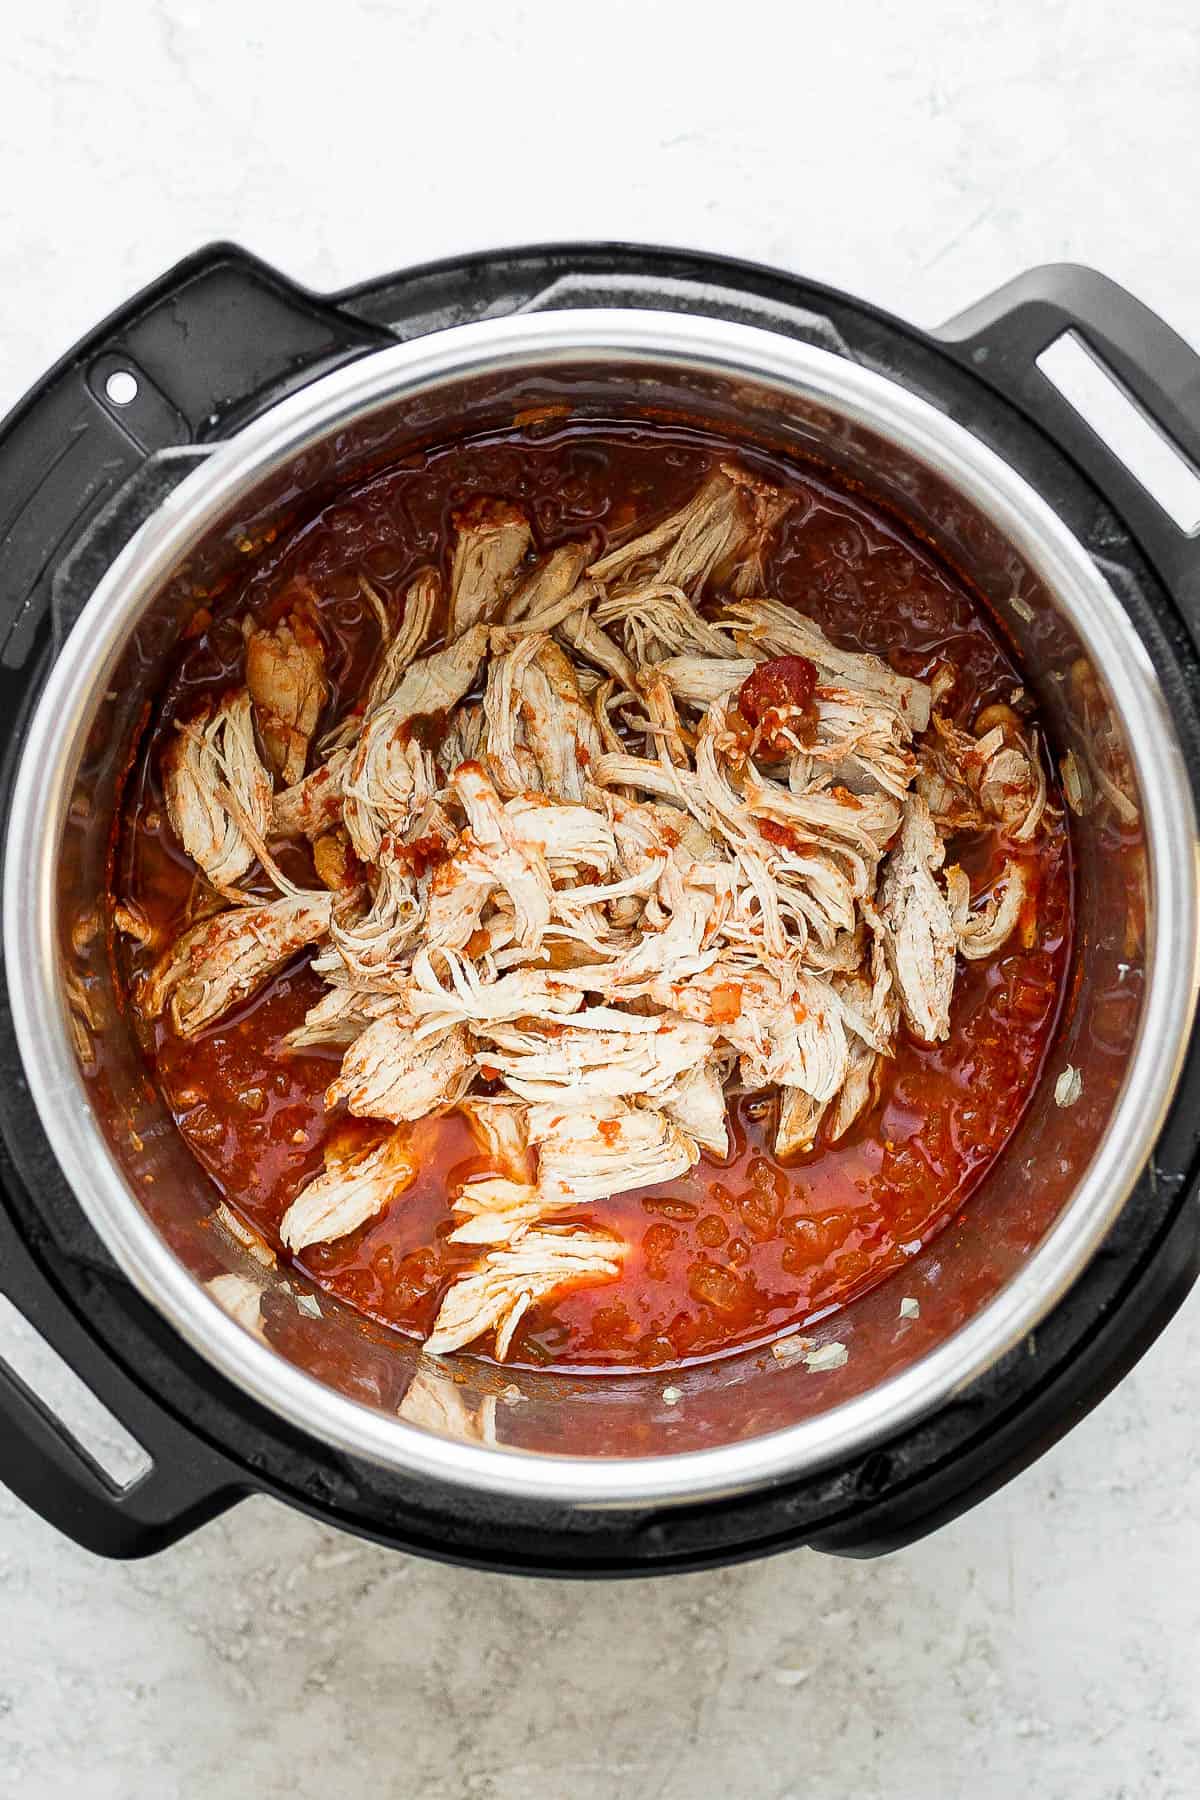 Shredded chicken placed back into the instant pot with the salsa mixture.